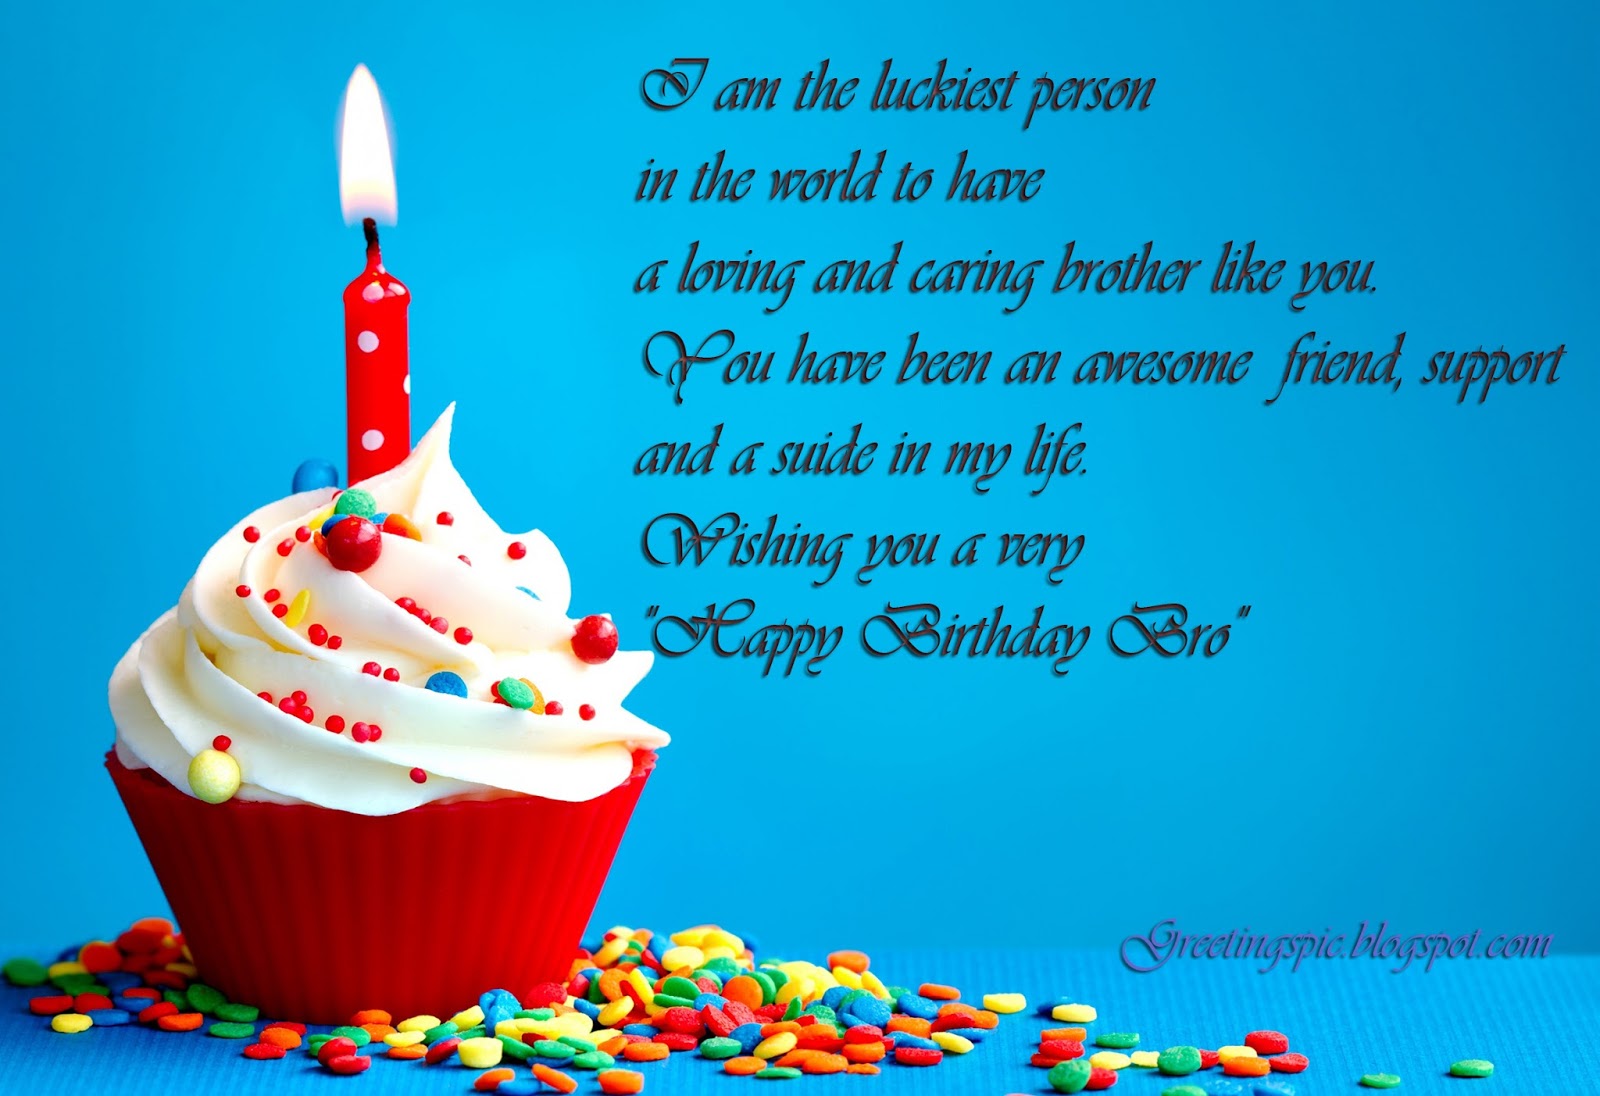 Birthday wishes quotes for brother with images Greetings